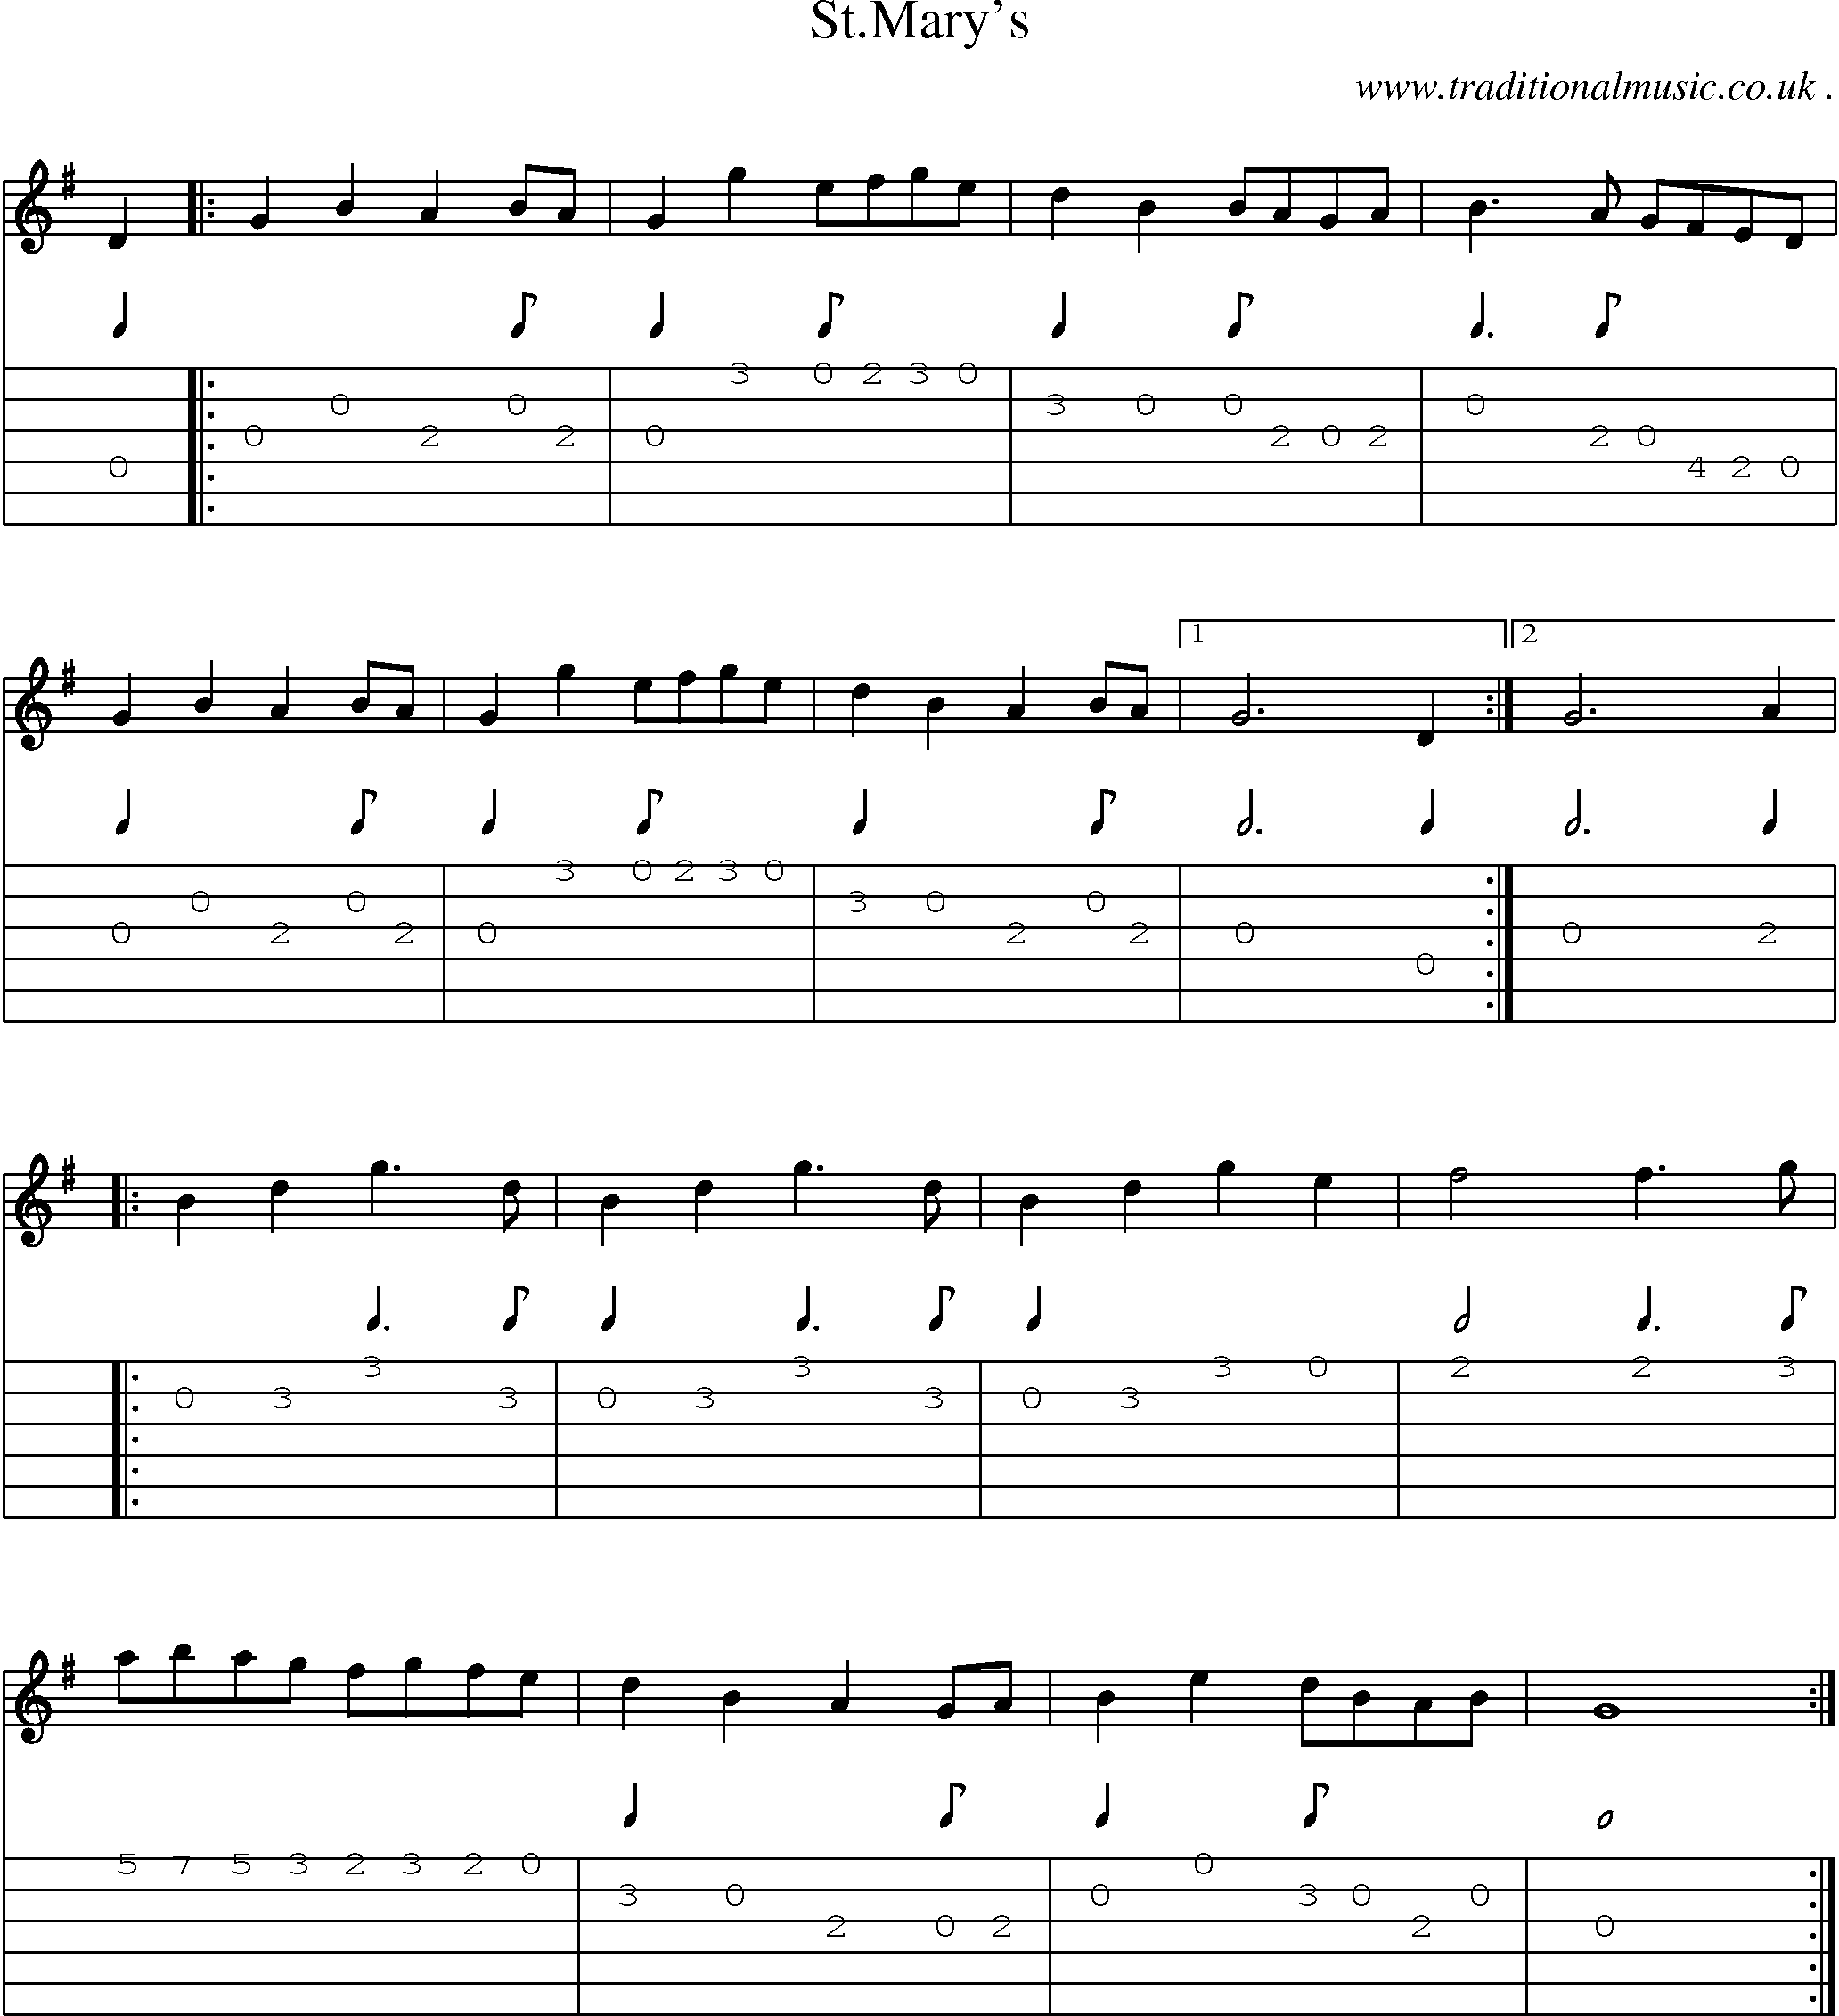 Sheet-Music and Guitar Tabs for Stmarys